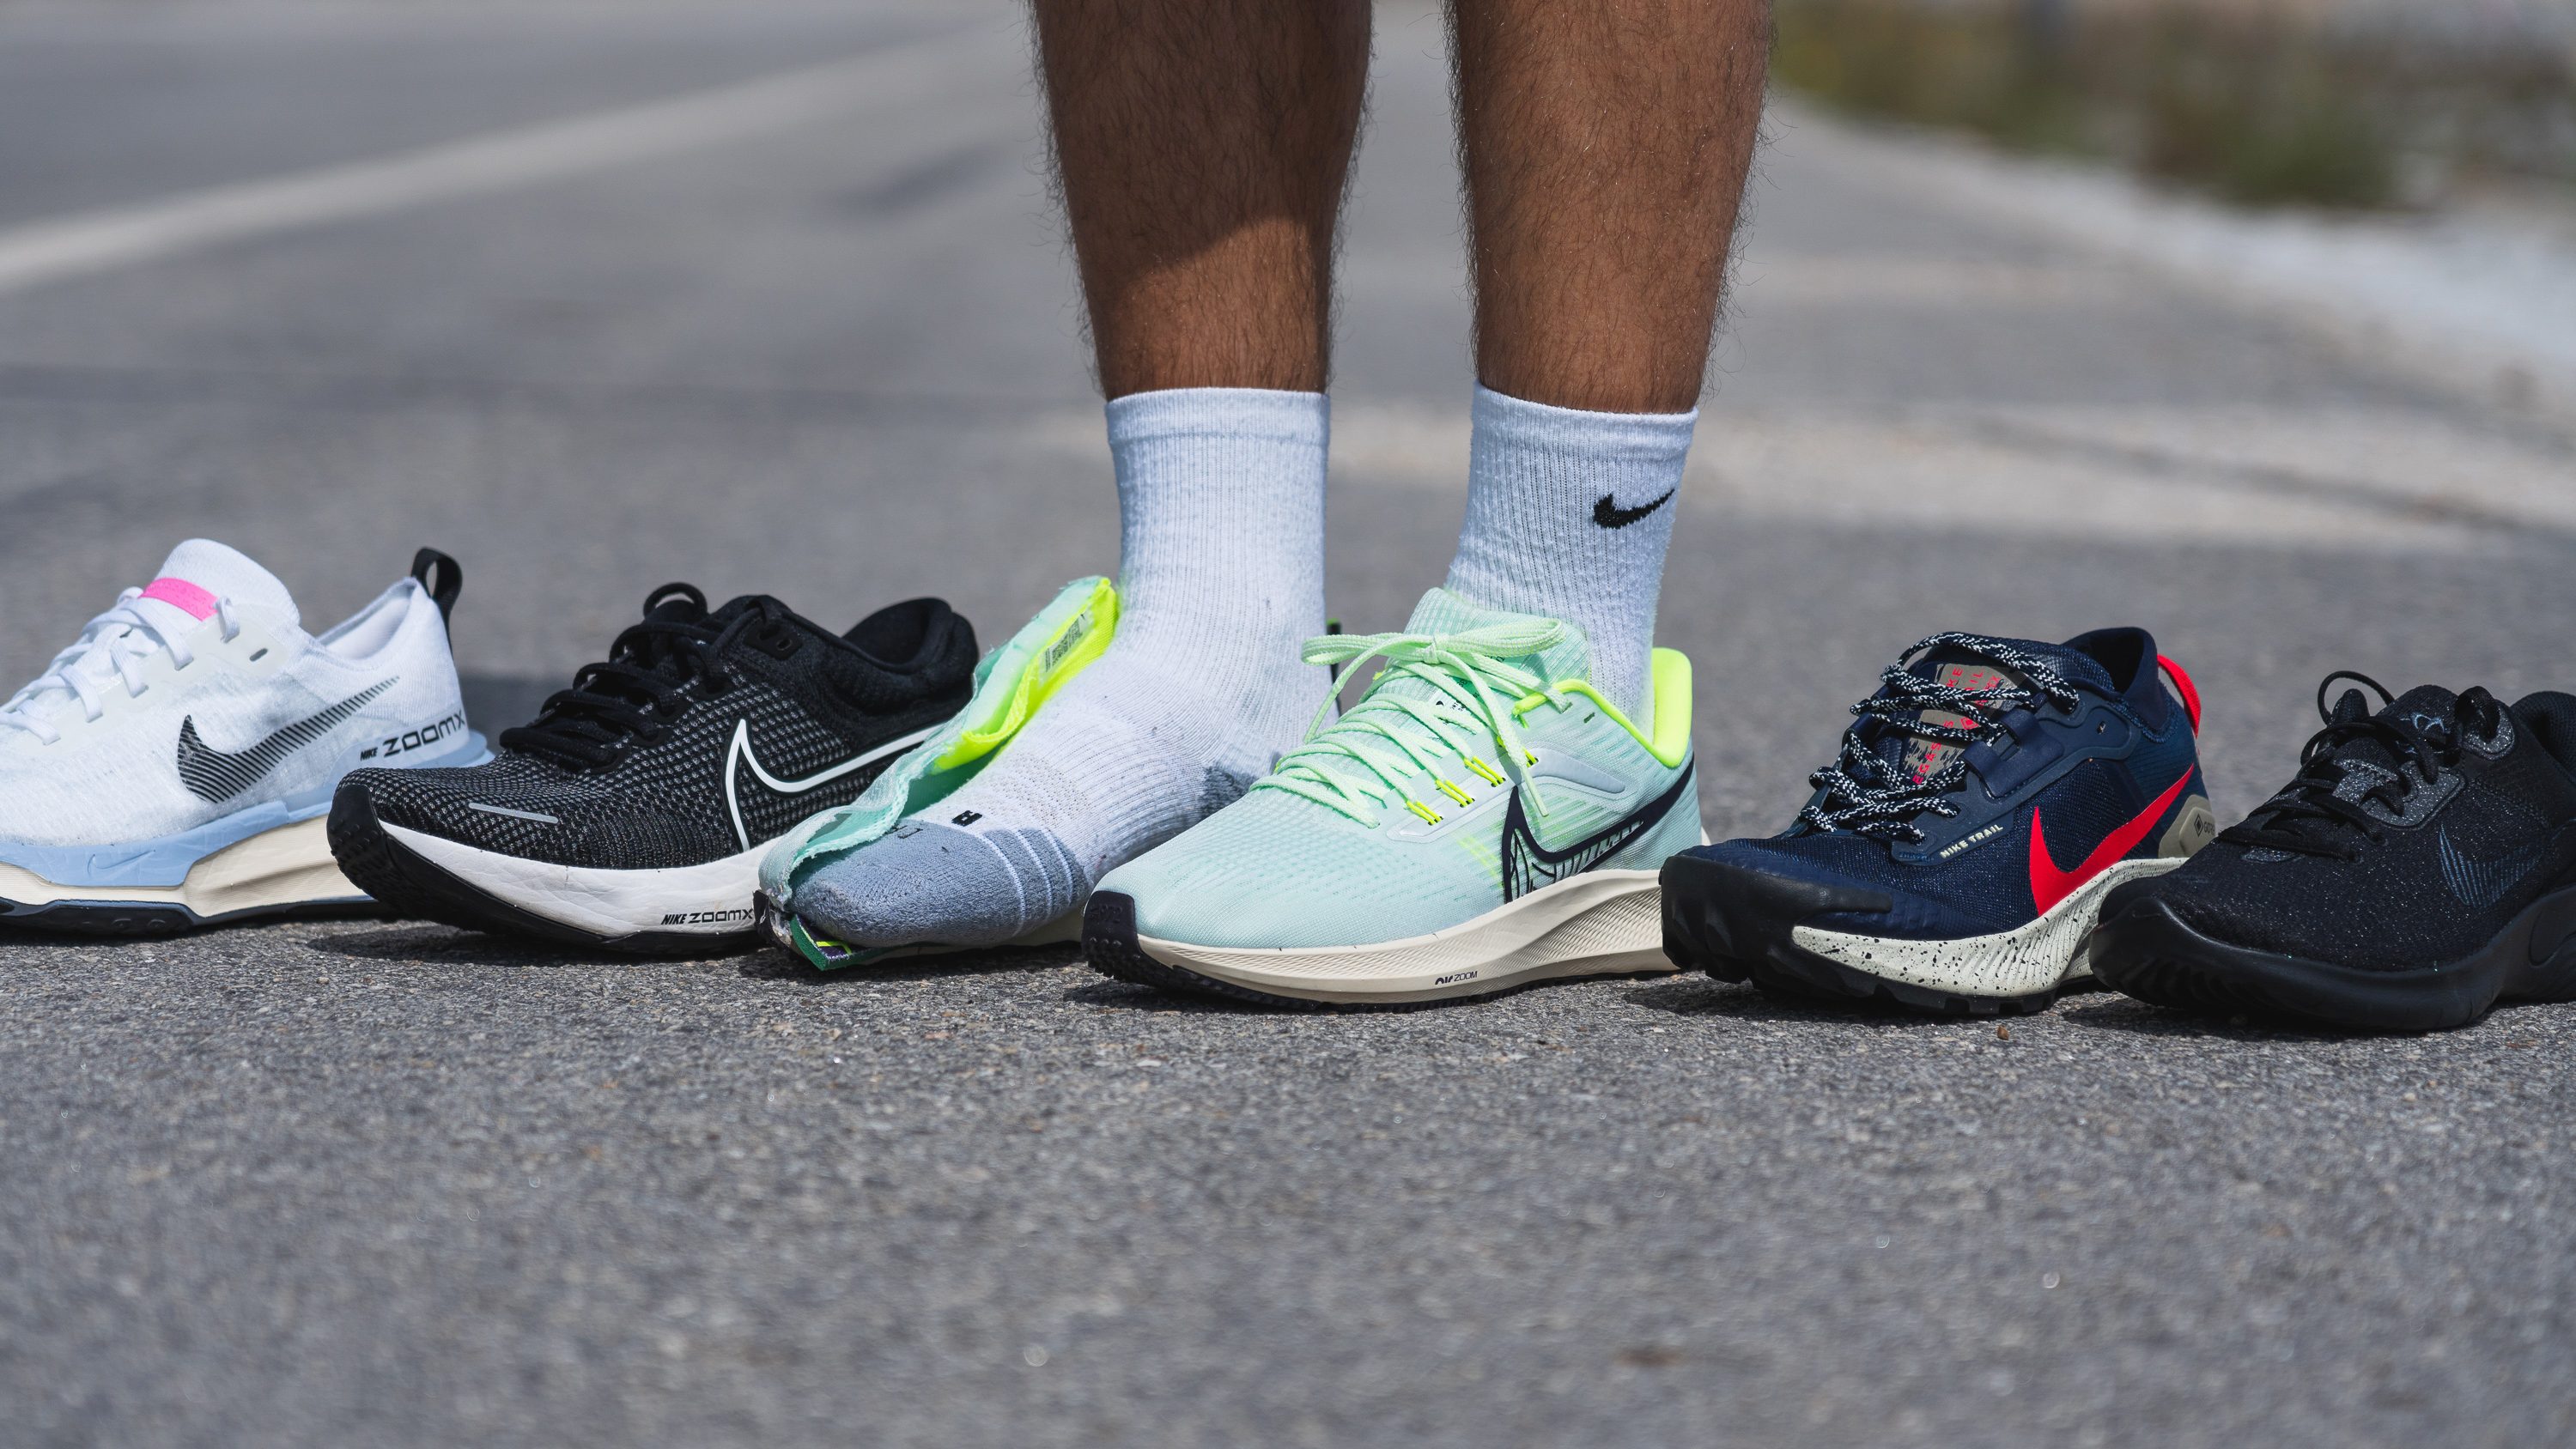 Why Choose Nike for Walking Shoes?